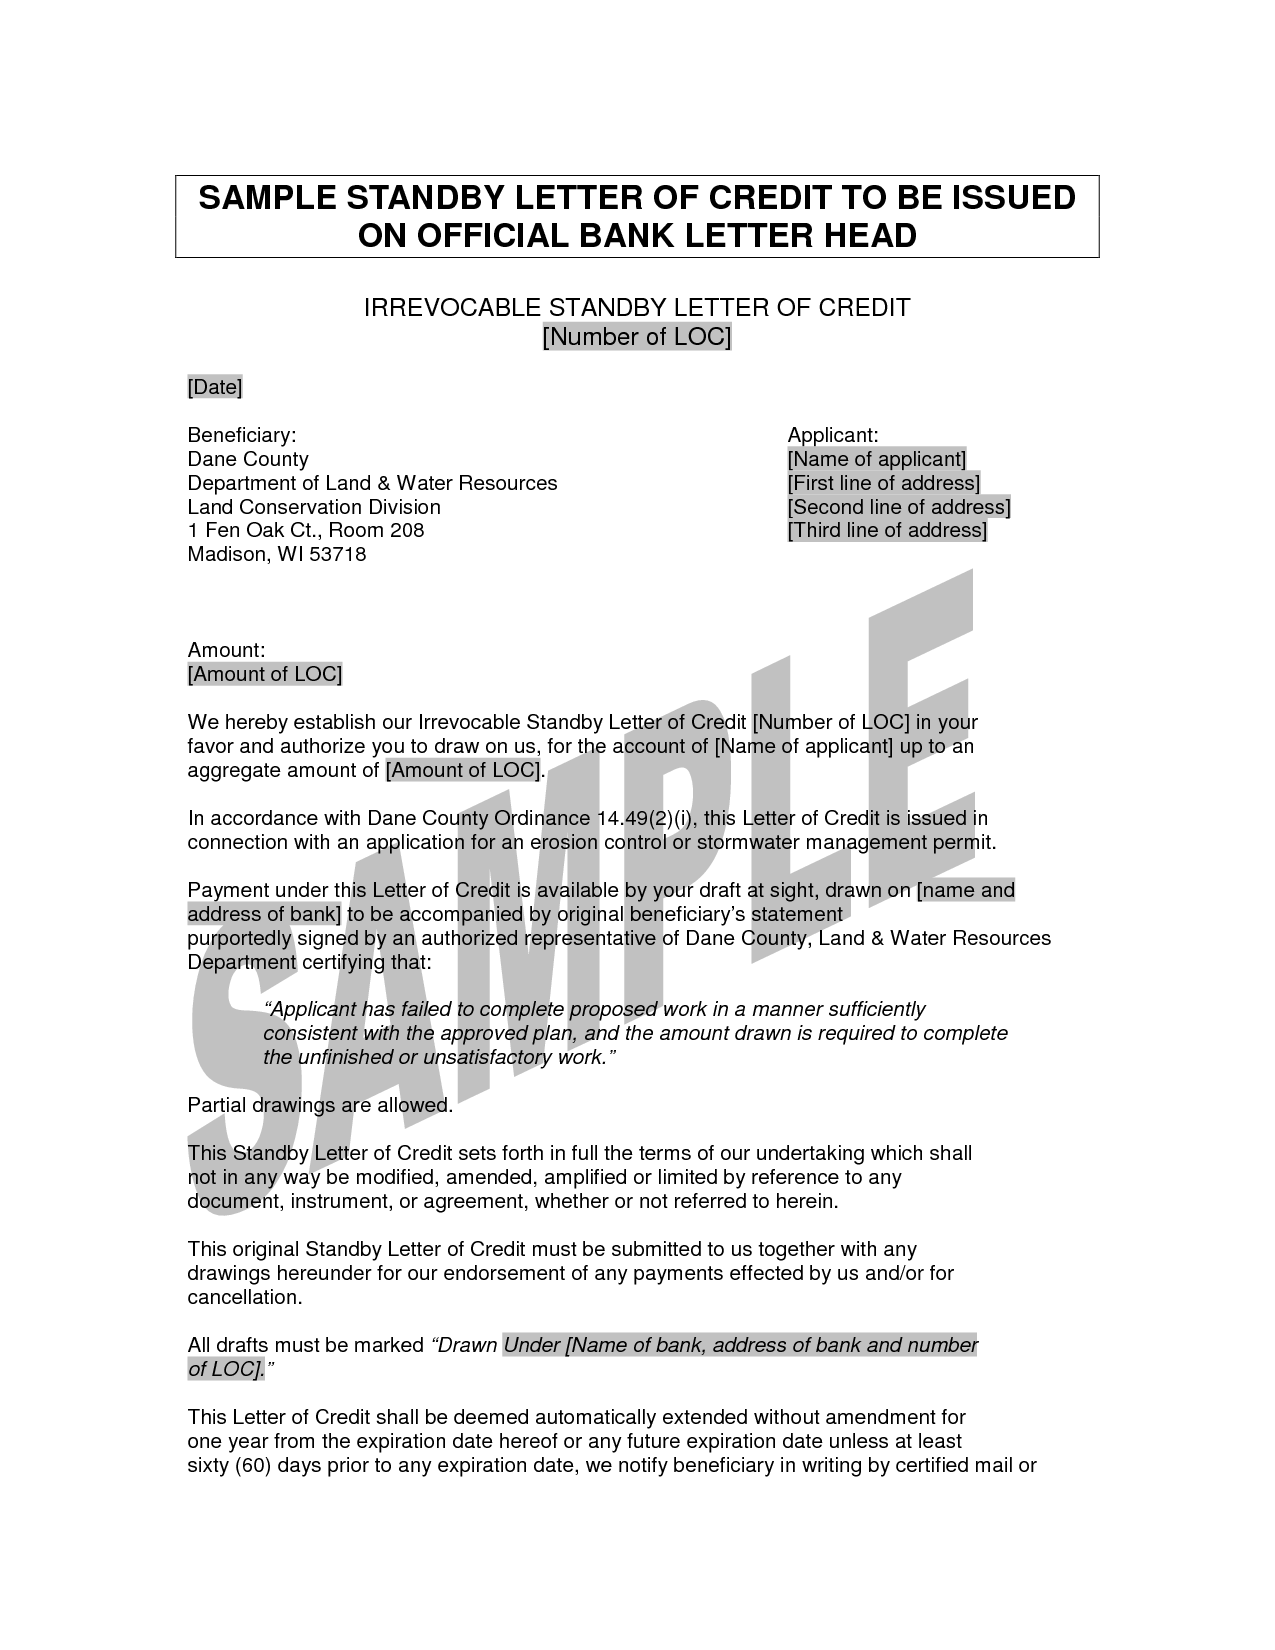 letter-of-credit-sample-templates